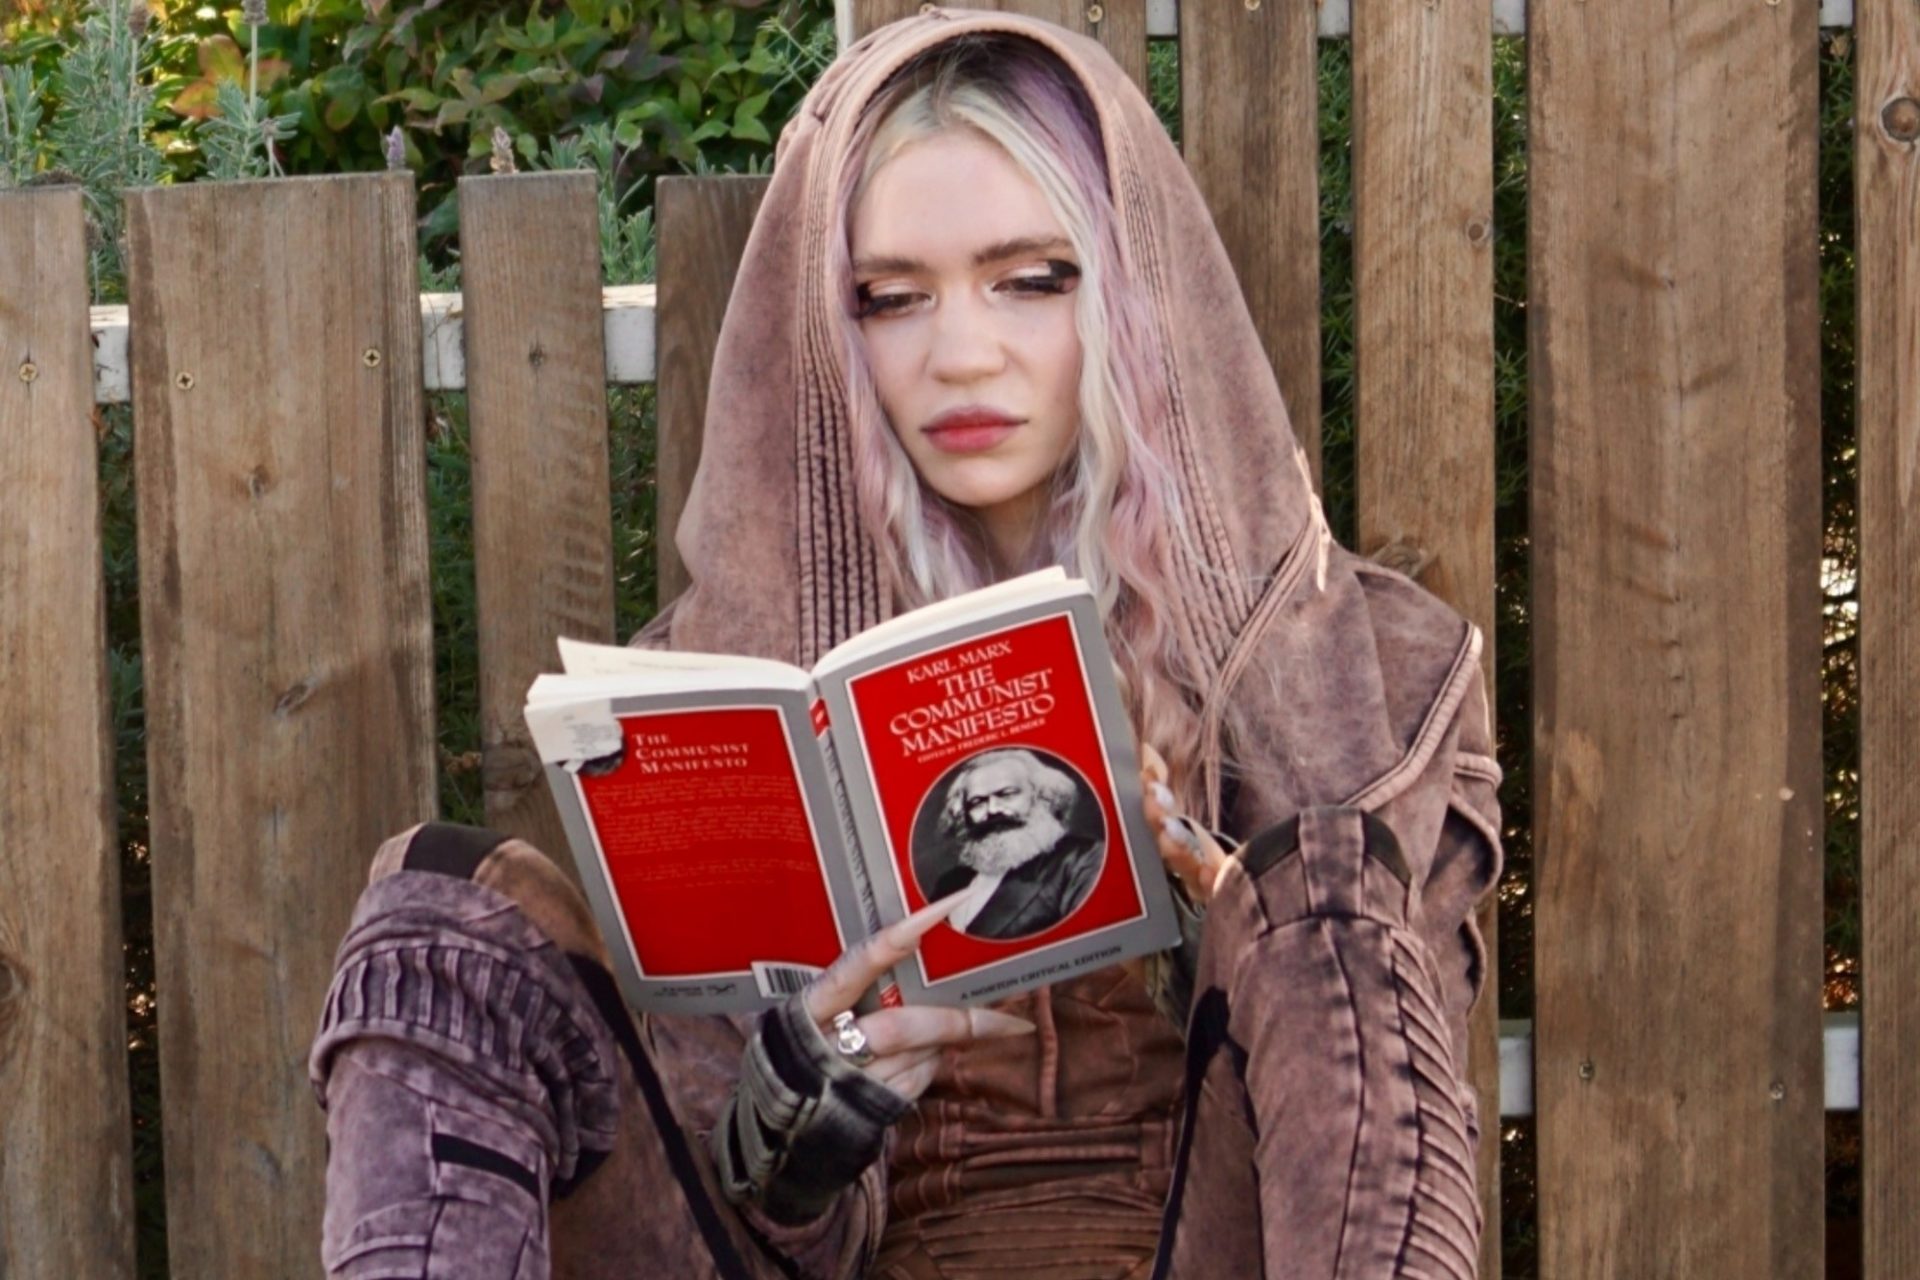 Grimes considered reading Karl Marx following damage up with world’s richest man Elon Musk